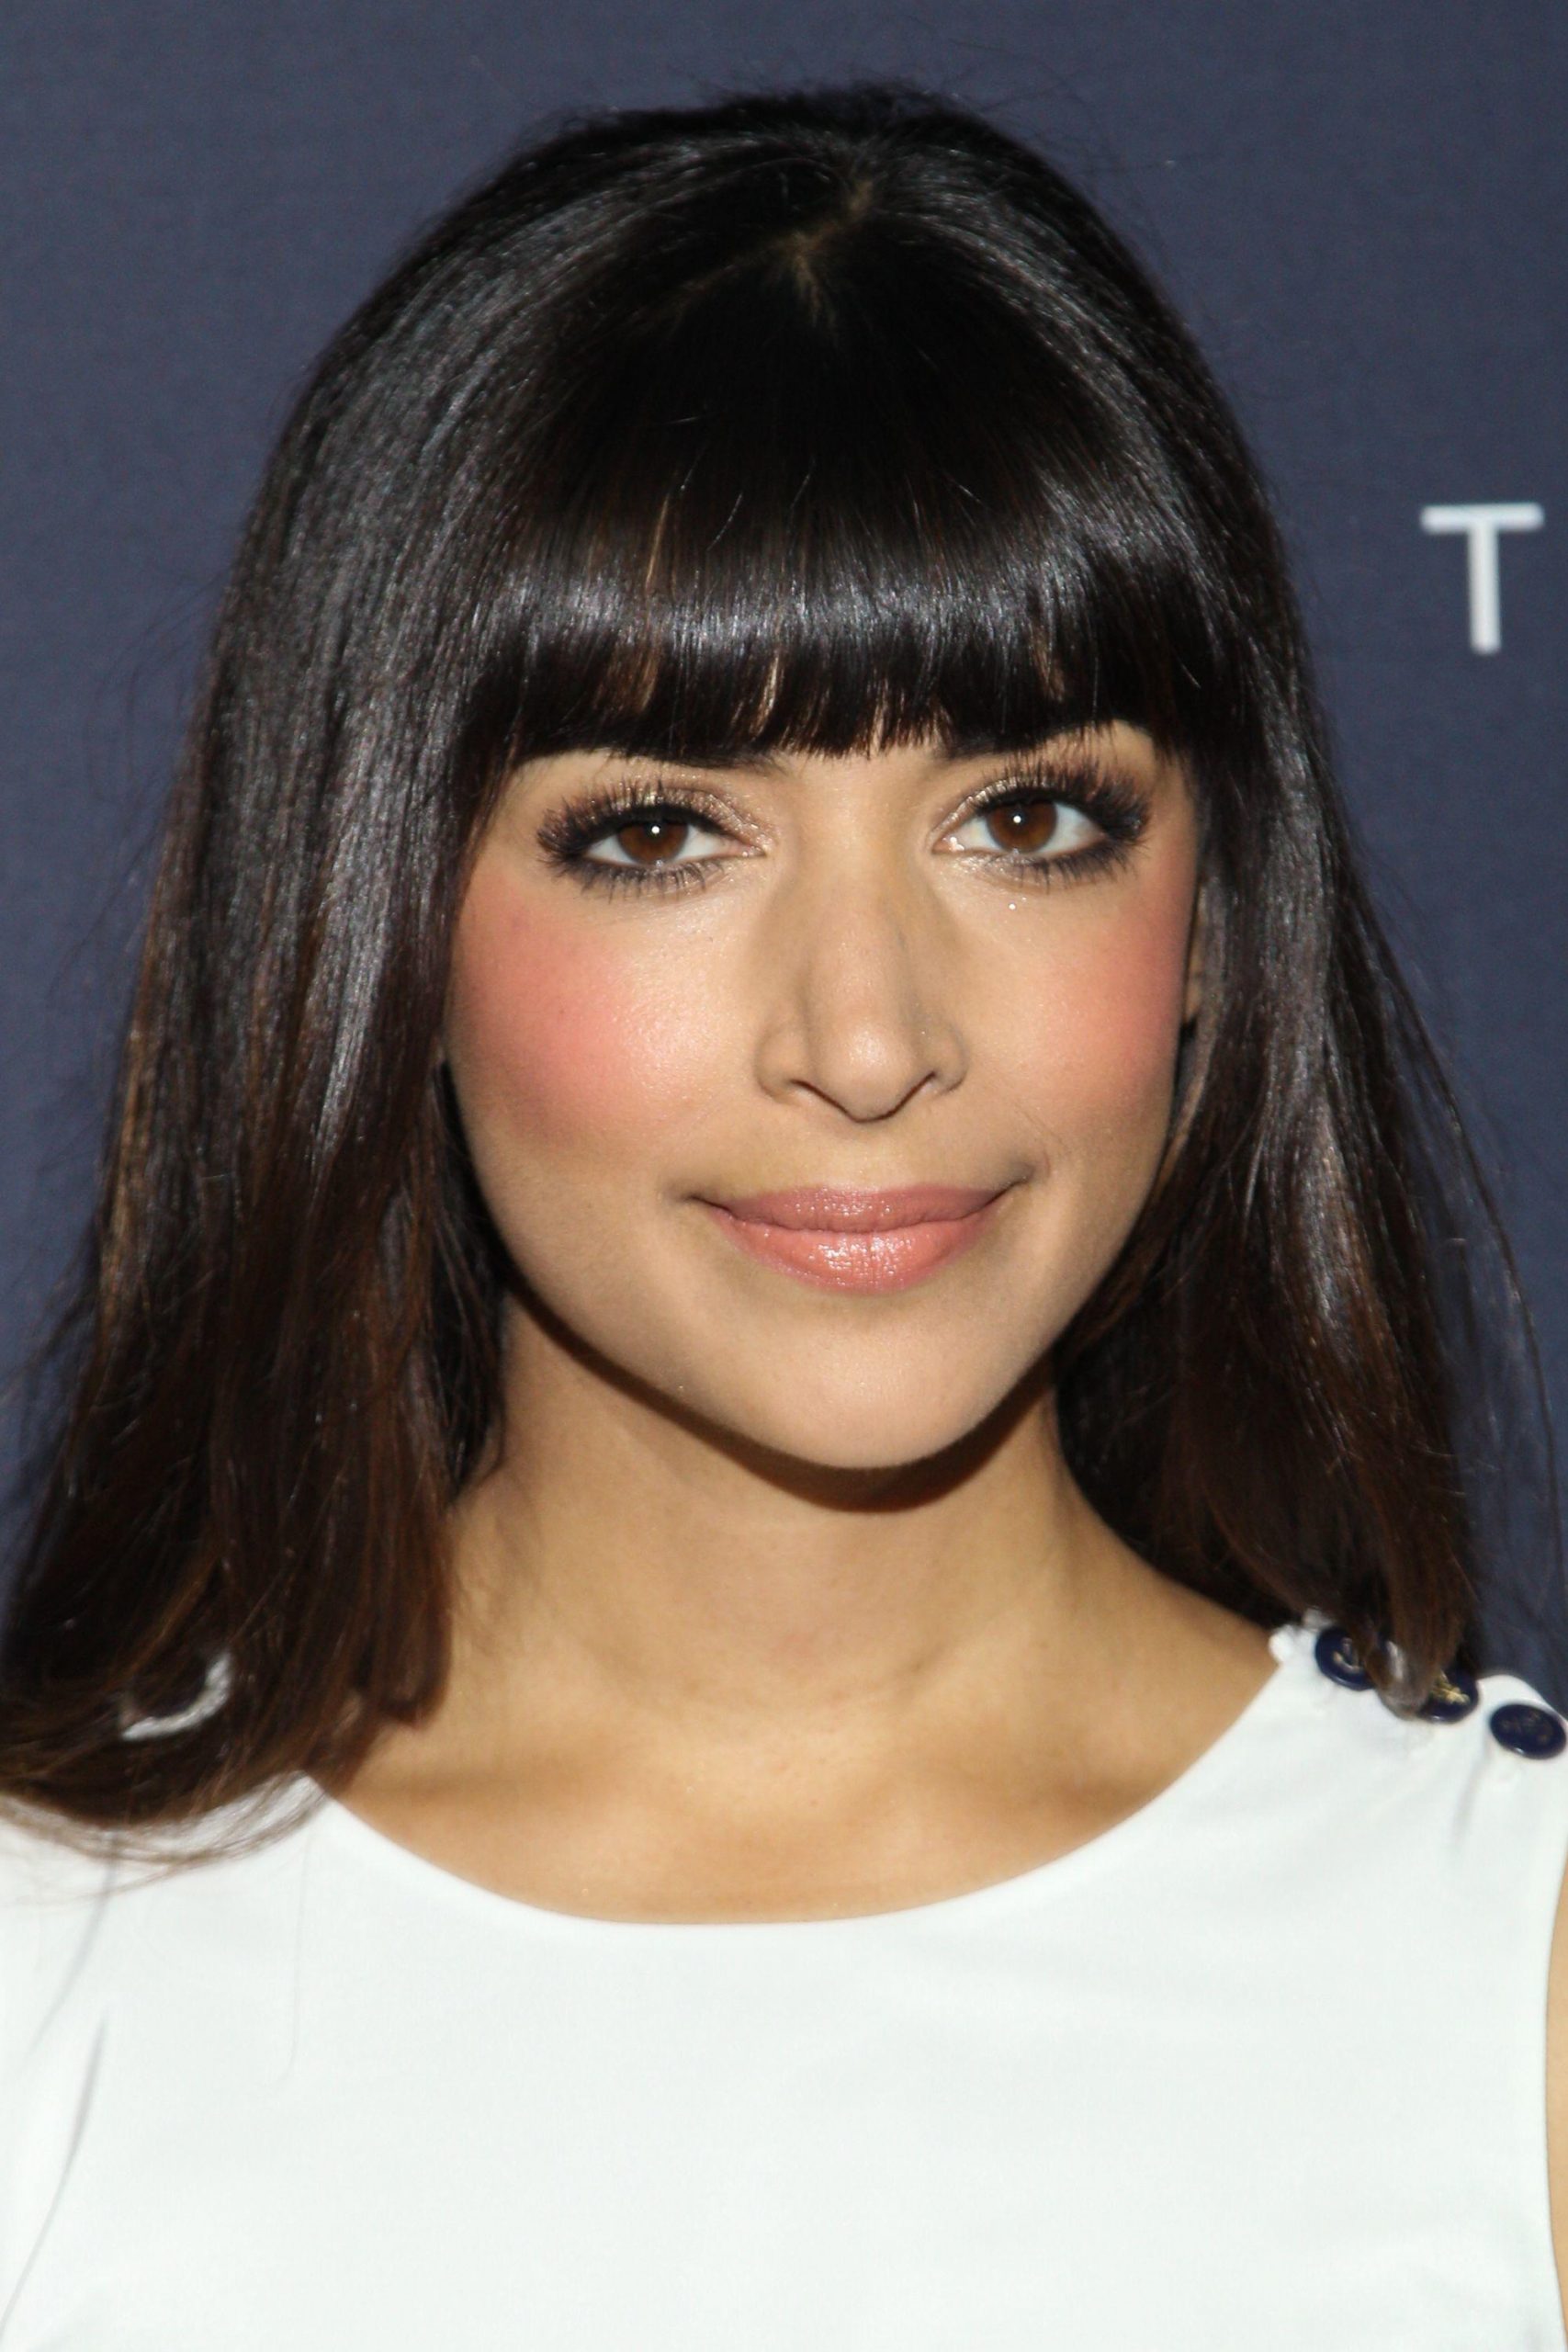 70+ Hot Pictures Of Hannah Simone Are Sexy As Hell 3